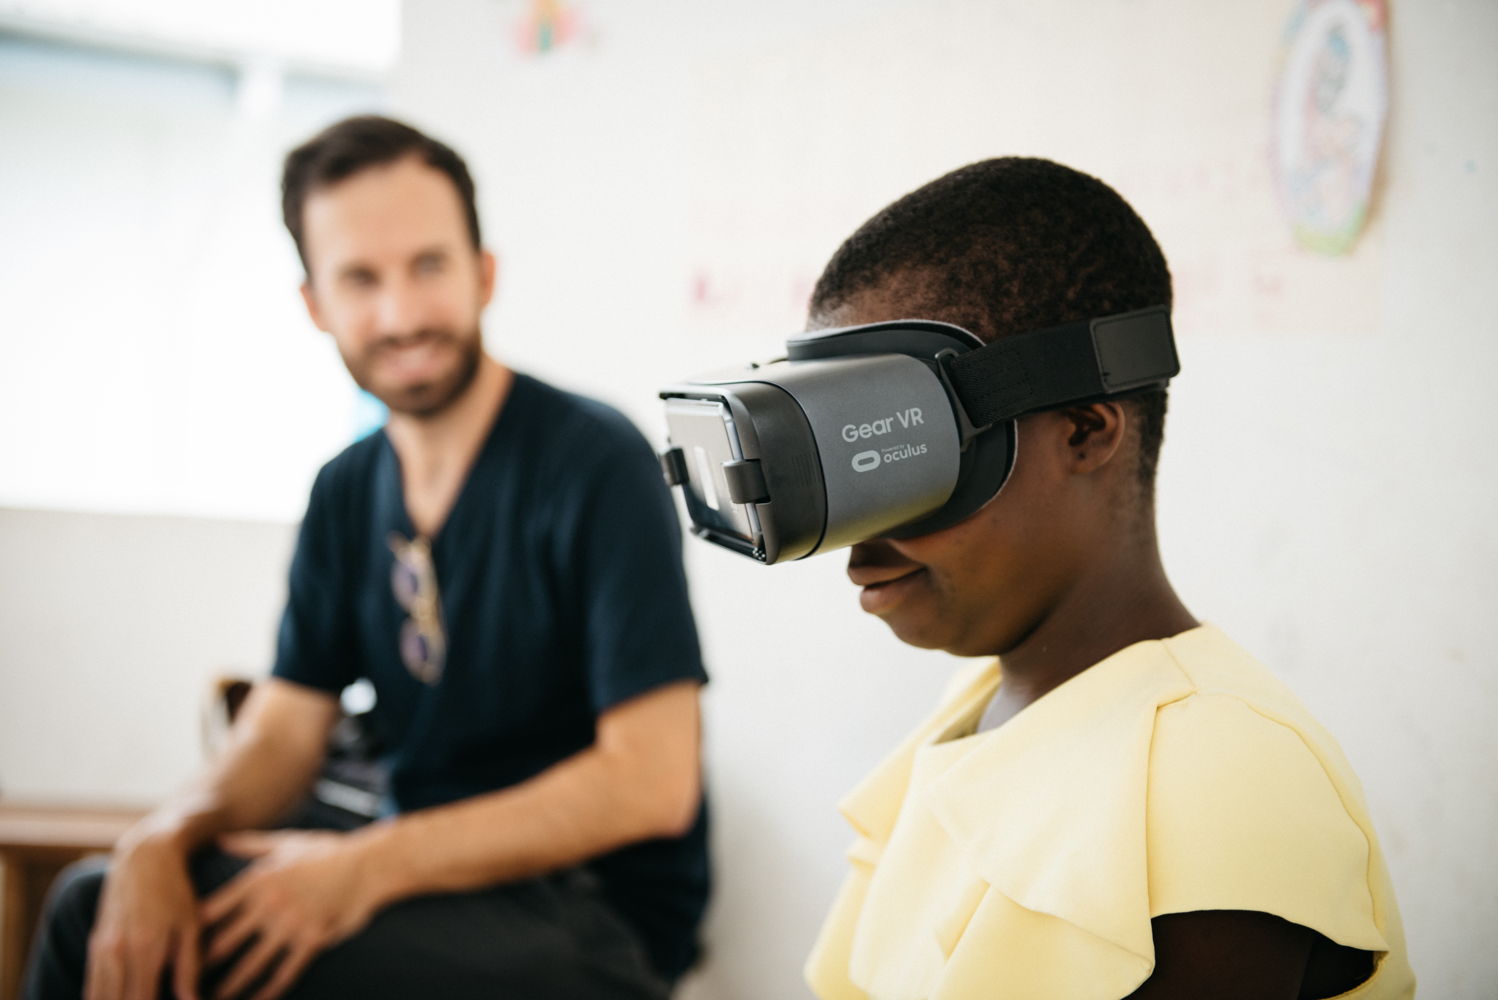 Edith VR screening Edith, a Mercy Ships patient from Cameroon, watches a virtual reality film with director Armando Kirwin, left. Kirwin’s film “Mercy” documents Edith’s life-changing transformation through Mercy Ships.